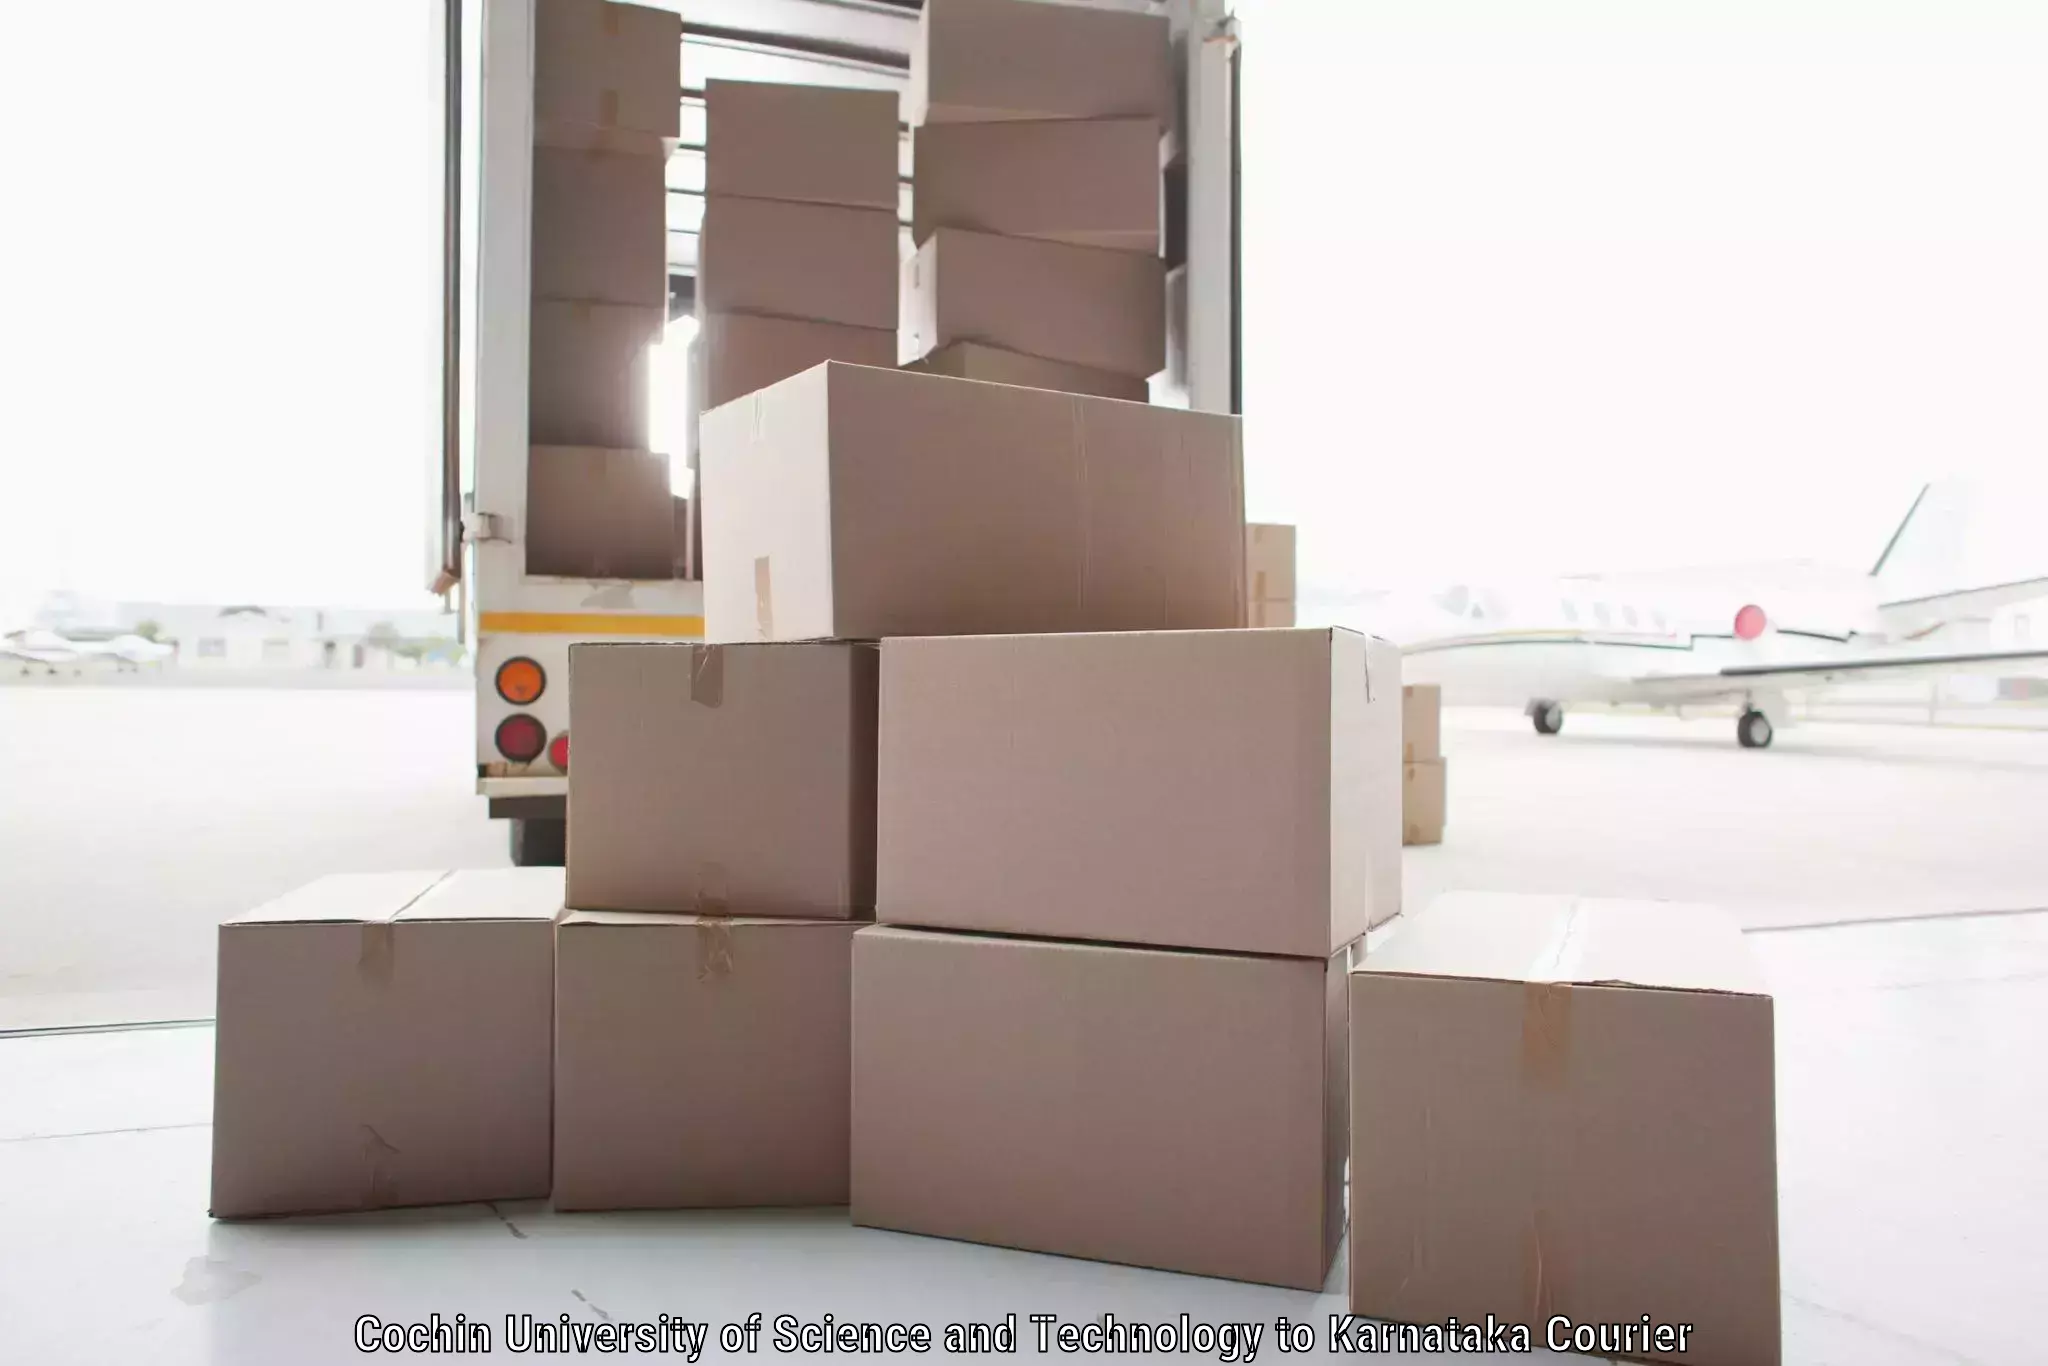 Reliable freight solutions Cochin University of Science and Technology to Karnataka